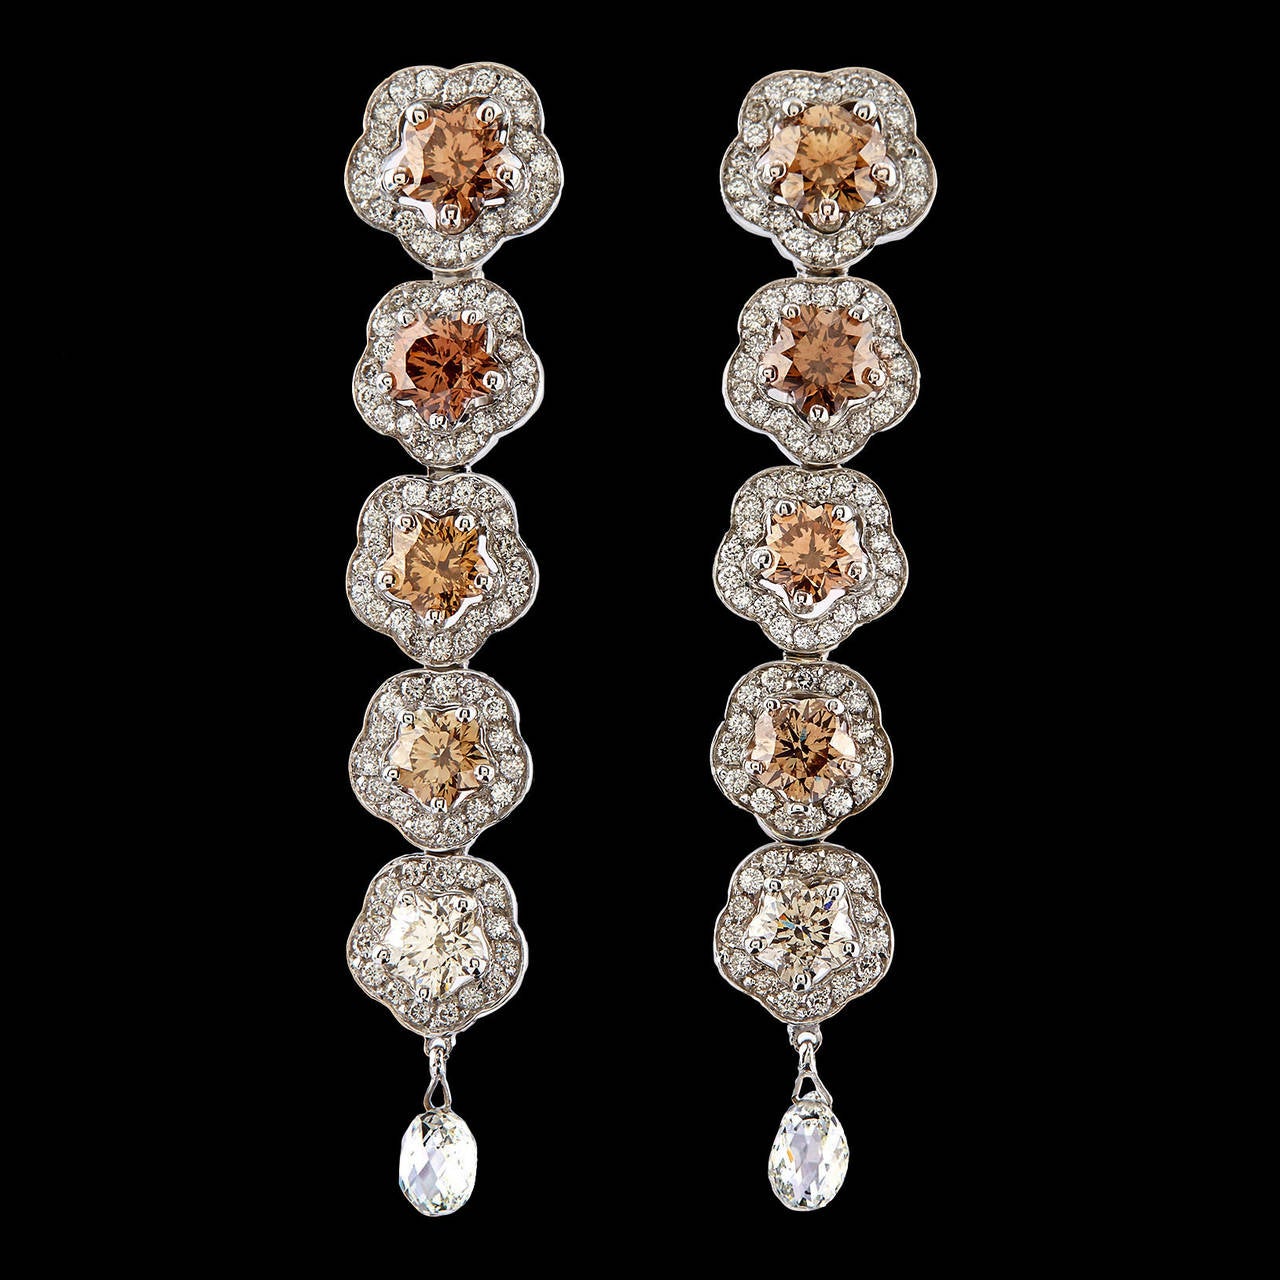 Luca Carati Italian Made Floral Earrings Feature 5.14 Carat Total Weight of Graduated Brown Diamonds Cut as Flowers. The design is enhanced with an additional 2.24 approximate carat total weight of F-G color, VS clarity diamonds. The earrings